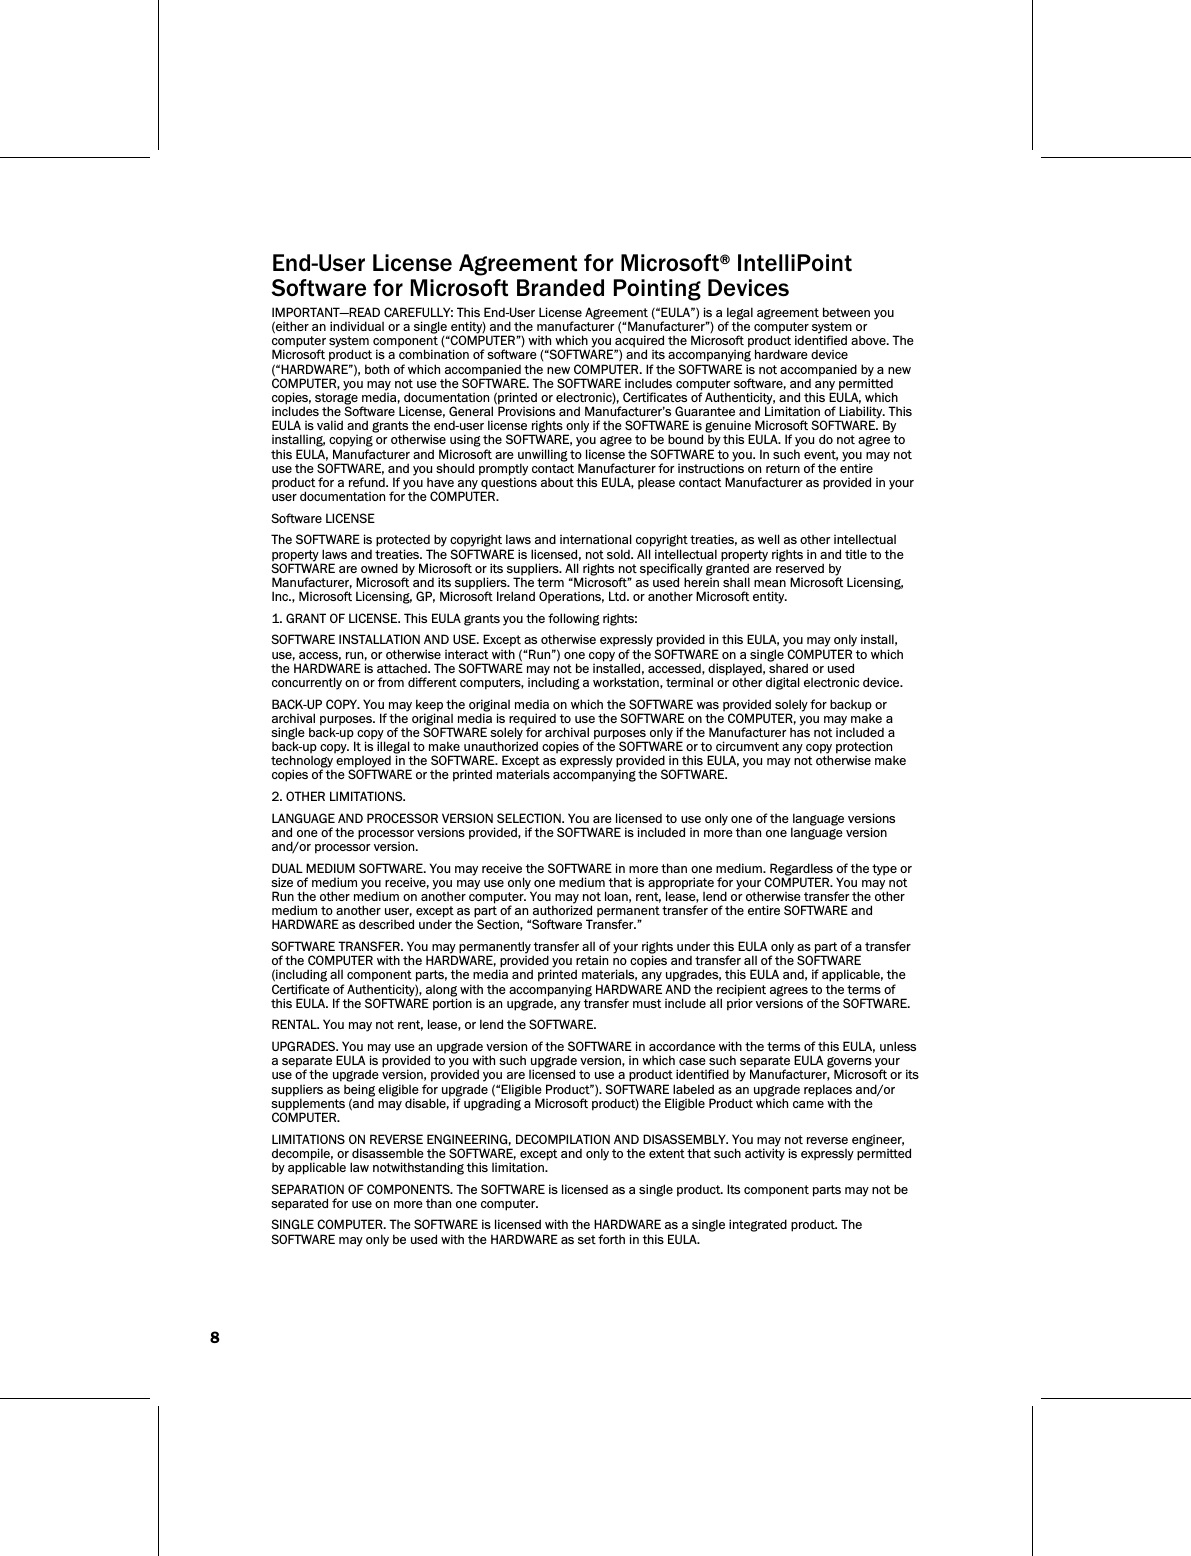 8     End-User License Agreement for Microsoft® IntelliPoint    Software for Microsoft Branded Pointing Devices IMPORTANT—READ CAREFULLY: This End-User License Agreement (“EULA”) is a legal agreement between you (either an individual or a single entity) and the manufacturer (“Manufacturer”) of the computer system or computer system component (“COMPUTER”) with which you acquired the Microsoft product identified above. The Microsoft product is a combination of software (“SOFTWARE”) and its accompanying hardware device (“HARDWARE”), both of which accompanied the new COMPUTER. If the SOFTWARE is not accompanied by a new COMPUTER, you may not use the SOFTWARE. The SOFTWARE includes computer software, and any permitted copies, storage media, documentation (printed or electronic), Certificates of Authenticity, and this EULA, which includes the Software License, General Provisions and Manufacturer’s Guarantee and Limitation of Liability. This EULA is valid and grants the end-user license rights only if the SOFTWARE is genuine Microsoft SOFTWARE. By installing, copying or otherwise using the SOFTWARE, you agree to be bound by this EULA. If you do not agree to this EULA, Manufacturer and Microsoft are unwilling to license the SOFTWARE to you. In such event, you may not use the SOFTWARE, and you should promptly contact Manufacturer for instructions on return of the entire product for a refund. If you have any questions about this EULA, please contact Manufacturer as provided in your user documentation for the COMPUTER. Software LICENSE The SOFTWARE is protected by copyright laws and international copyright treaties, as well as other intellectual property laws and treaties. The SOFTWARE is licensed, not sold. All intellectual property rights in and title to the SOFTWARE are owned by Microsoft or its suppliers. All rights not specifically granted are reserved by Manufacturer, Microsoft and its suppliers. The term “Microsoft” as used herein shall mean Microsoft Licensing, Inc., Microsoft Licensing, GP, Microsoft Ireland Operations, Ltd. or another Microsoft entity. 1. GRANT OF LICENSE. This EULA grants you the following rights: SOFTWARE INSTALLATION AND USE. Except as otherwise expressly provided in this EULA, you may only install, use, access, run, or otherwise interact with (“Run”) one copy of the SOFTWARE on a single COMPUTER to which the HARDWARE is attached. The SOFTWARE may not be installed, accessed, displayed, shared or used concurrently on or from different computers, including a workstation, terminal or other digital electronic device. BACK-UP COPY. You may keep the original media on which the SOFTWARE was provided solely for backup or archival purposes. If the original media is required to use the SOFTWARE on the COMPUTER, you may make a single back-up copy of the SOFTWARE solely for archival purposes only if the Manufacturer has not included a back-up copy. It is illegal to make unauthorized copies of the SOFTWARE or to circumvent any copy protection technology employed in the SOFTWARE. Except as expressly provided in this EULA, you may not otherwise make copies of the SOFTWARE or the printed materials accompanying the SOFTWARE. 2. OTHER LIMITATIONS.  LANGUAGE AND PROCESSOR VERSION SELECTION. You are licensed to use only one of the language versions and one of the processor versions provided, if the SOFTWARE is included in more than one language version and/or processor version. DUAL MEDIUM SOFTWARE. You may receive the SOFTWARE in more than one medium. Regardless of the type or size of medium you receive, you may use only one medium that is appropriate for your COMPUTER. You may not Run the other medium on another computer. You may not loan, rent, lease, lend or otherwise transfer the other medium to another user, except as part of an authorized permanent transfer of the entire SOFTWARE and HARDWARE as described under the Section, “Software Transfer.” SOFTWARE TRANSFER. You may permanently transfer all of your rights under this EULA only as part of a transfer of the COMPUTER with the HARDWARE, provided you retain no copies and transfer all of the SOFTWARE (including all component parts, the media and printed materials, any upgrades, this EULA and, if applicable, the Certificate of Authenticity), along with the accompanying HARDWARE AND the recipient agrees to the terms of this EULA. If the SOFTWARE portion is an upgrade, any transfer must include all prior versions of the SOFTWARE. RENTAL. You may not rent, lease, or lend the SOFTWARE. UPGRADES. You may use an upgrade version of the SOFTWARE in accordance with the terms of this EULA, unless a separate EULA is provided to you with such upgrade version, in which case such separate EULA governs your use of the upgrade version, provided you are licensed to use a product identified by Manufacturer, Microsoft or its suppliers as being eligible for upgrade (“Eligible Product”). SOFTWARE labeled as an upgrade replaces and/or supplements (and may disable, if upgrading a Microsoft product) the Eligible Product which came with the COMPUTER. LIMITATIONS ON REVERSE ENGINEERING, DECOMPILATION AND DISASSEMBLY. You may not reverse engineer, decompile, or disassemble the SOFTWARE, except and only to the extent that such activity is expressly permitted by applicable law notwithstanding this limitation. SEPARATION OF COMPONENTS. The SOFTWARE is licensed as a single product. Its component parts may not be separated for use on more than one computer. SINGLE COMPUTER. The SOFTWARE is licensed with the HARDWARE as a single integrated product. The SOFTWARE may only be used with the HARDWARE as set forth in this EULA. 